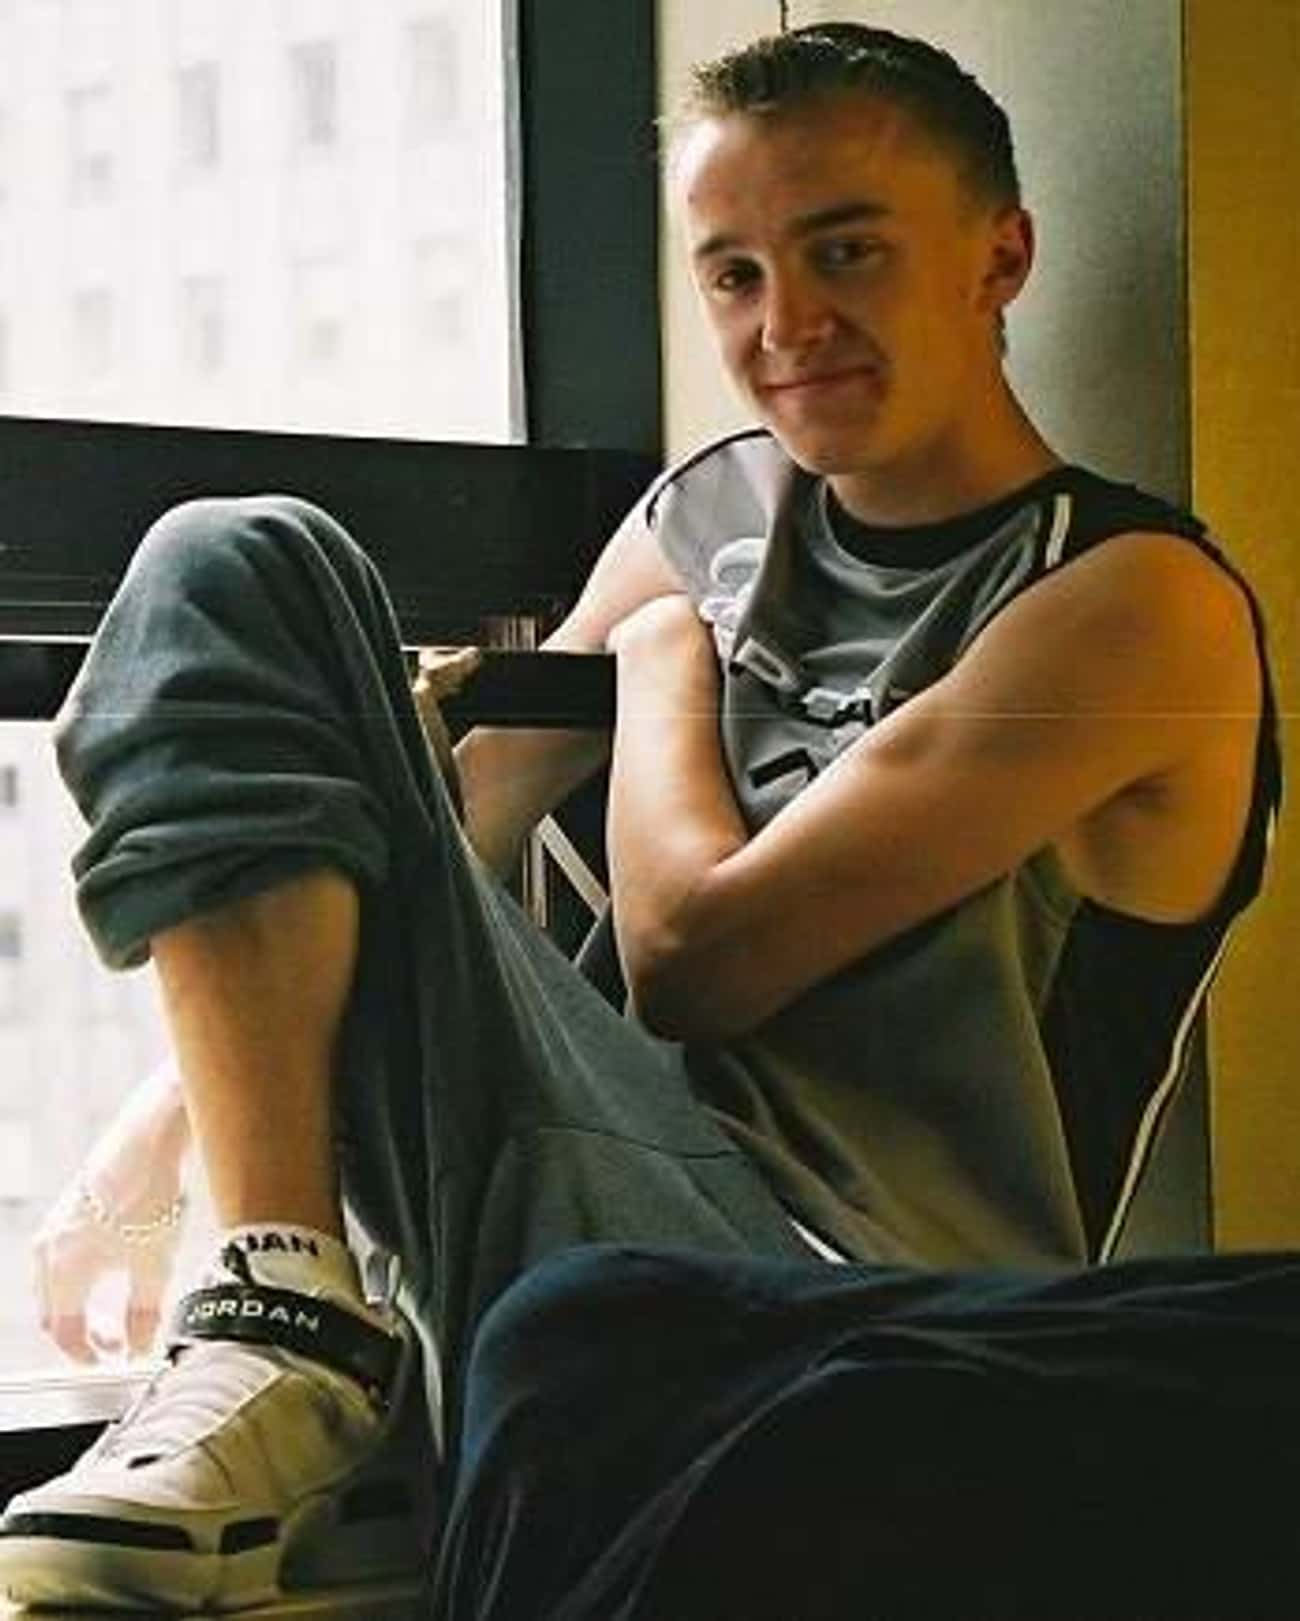 Tom Felton in Sports Double Vest with Loose Jeans